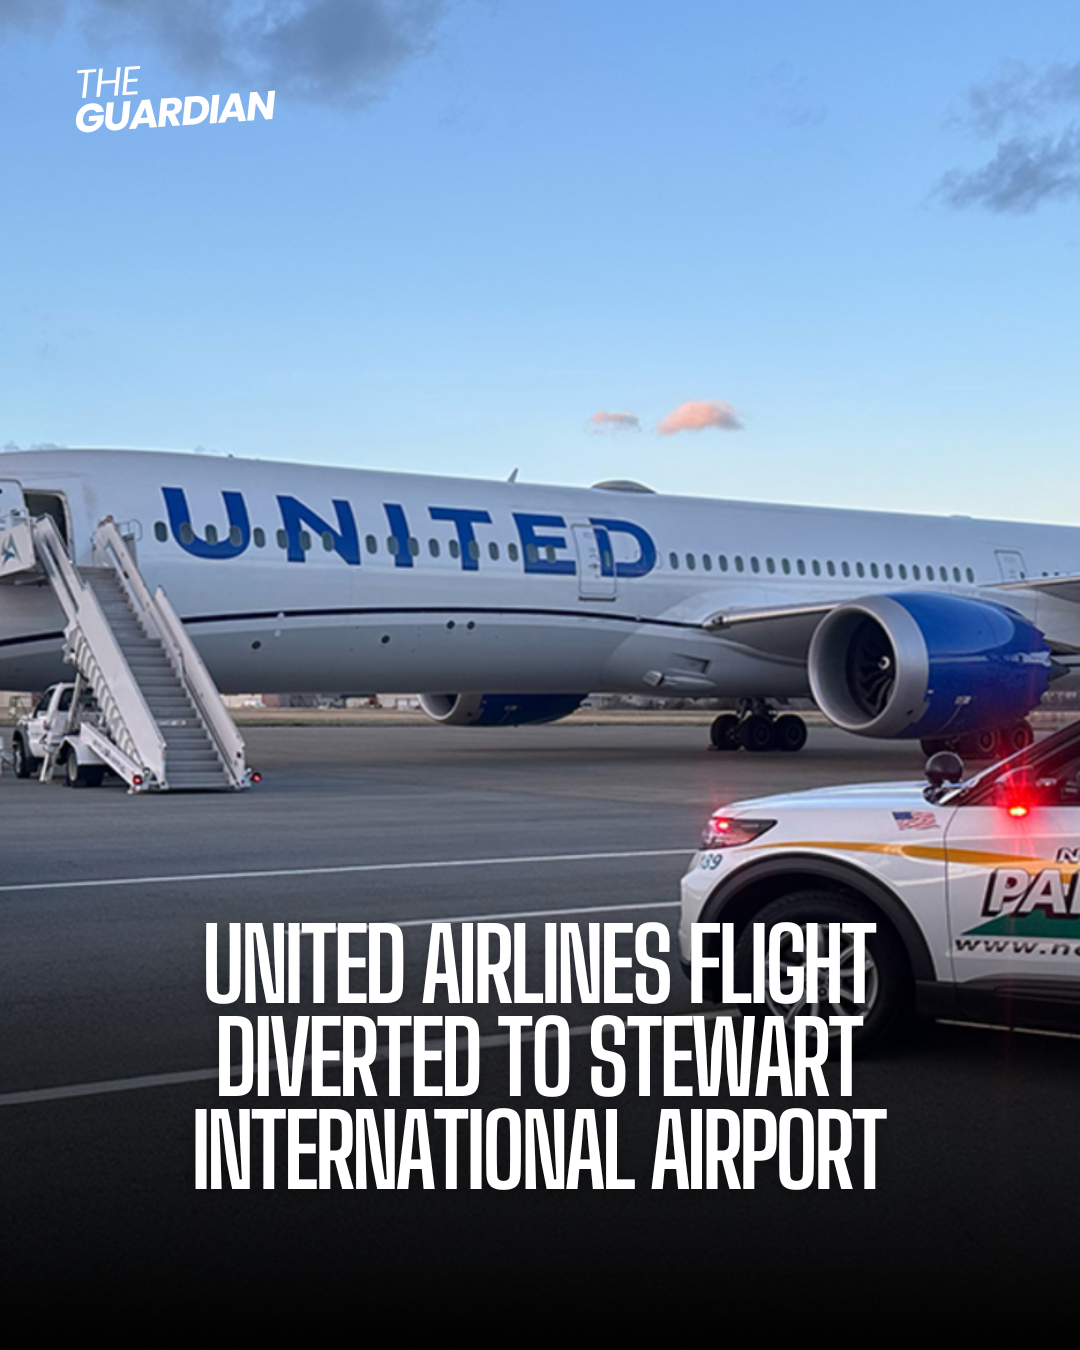 A United Airlines flight departing Tel Aviv for Newark Airport was diverted to Stewart International Airport in New York.